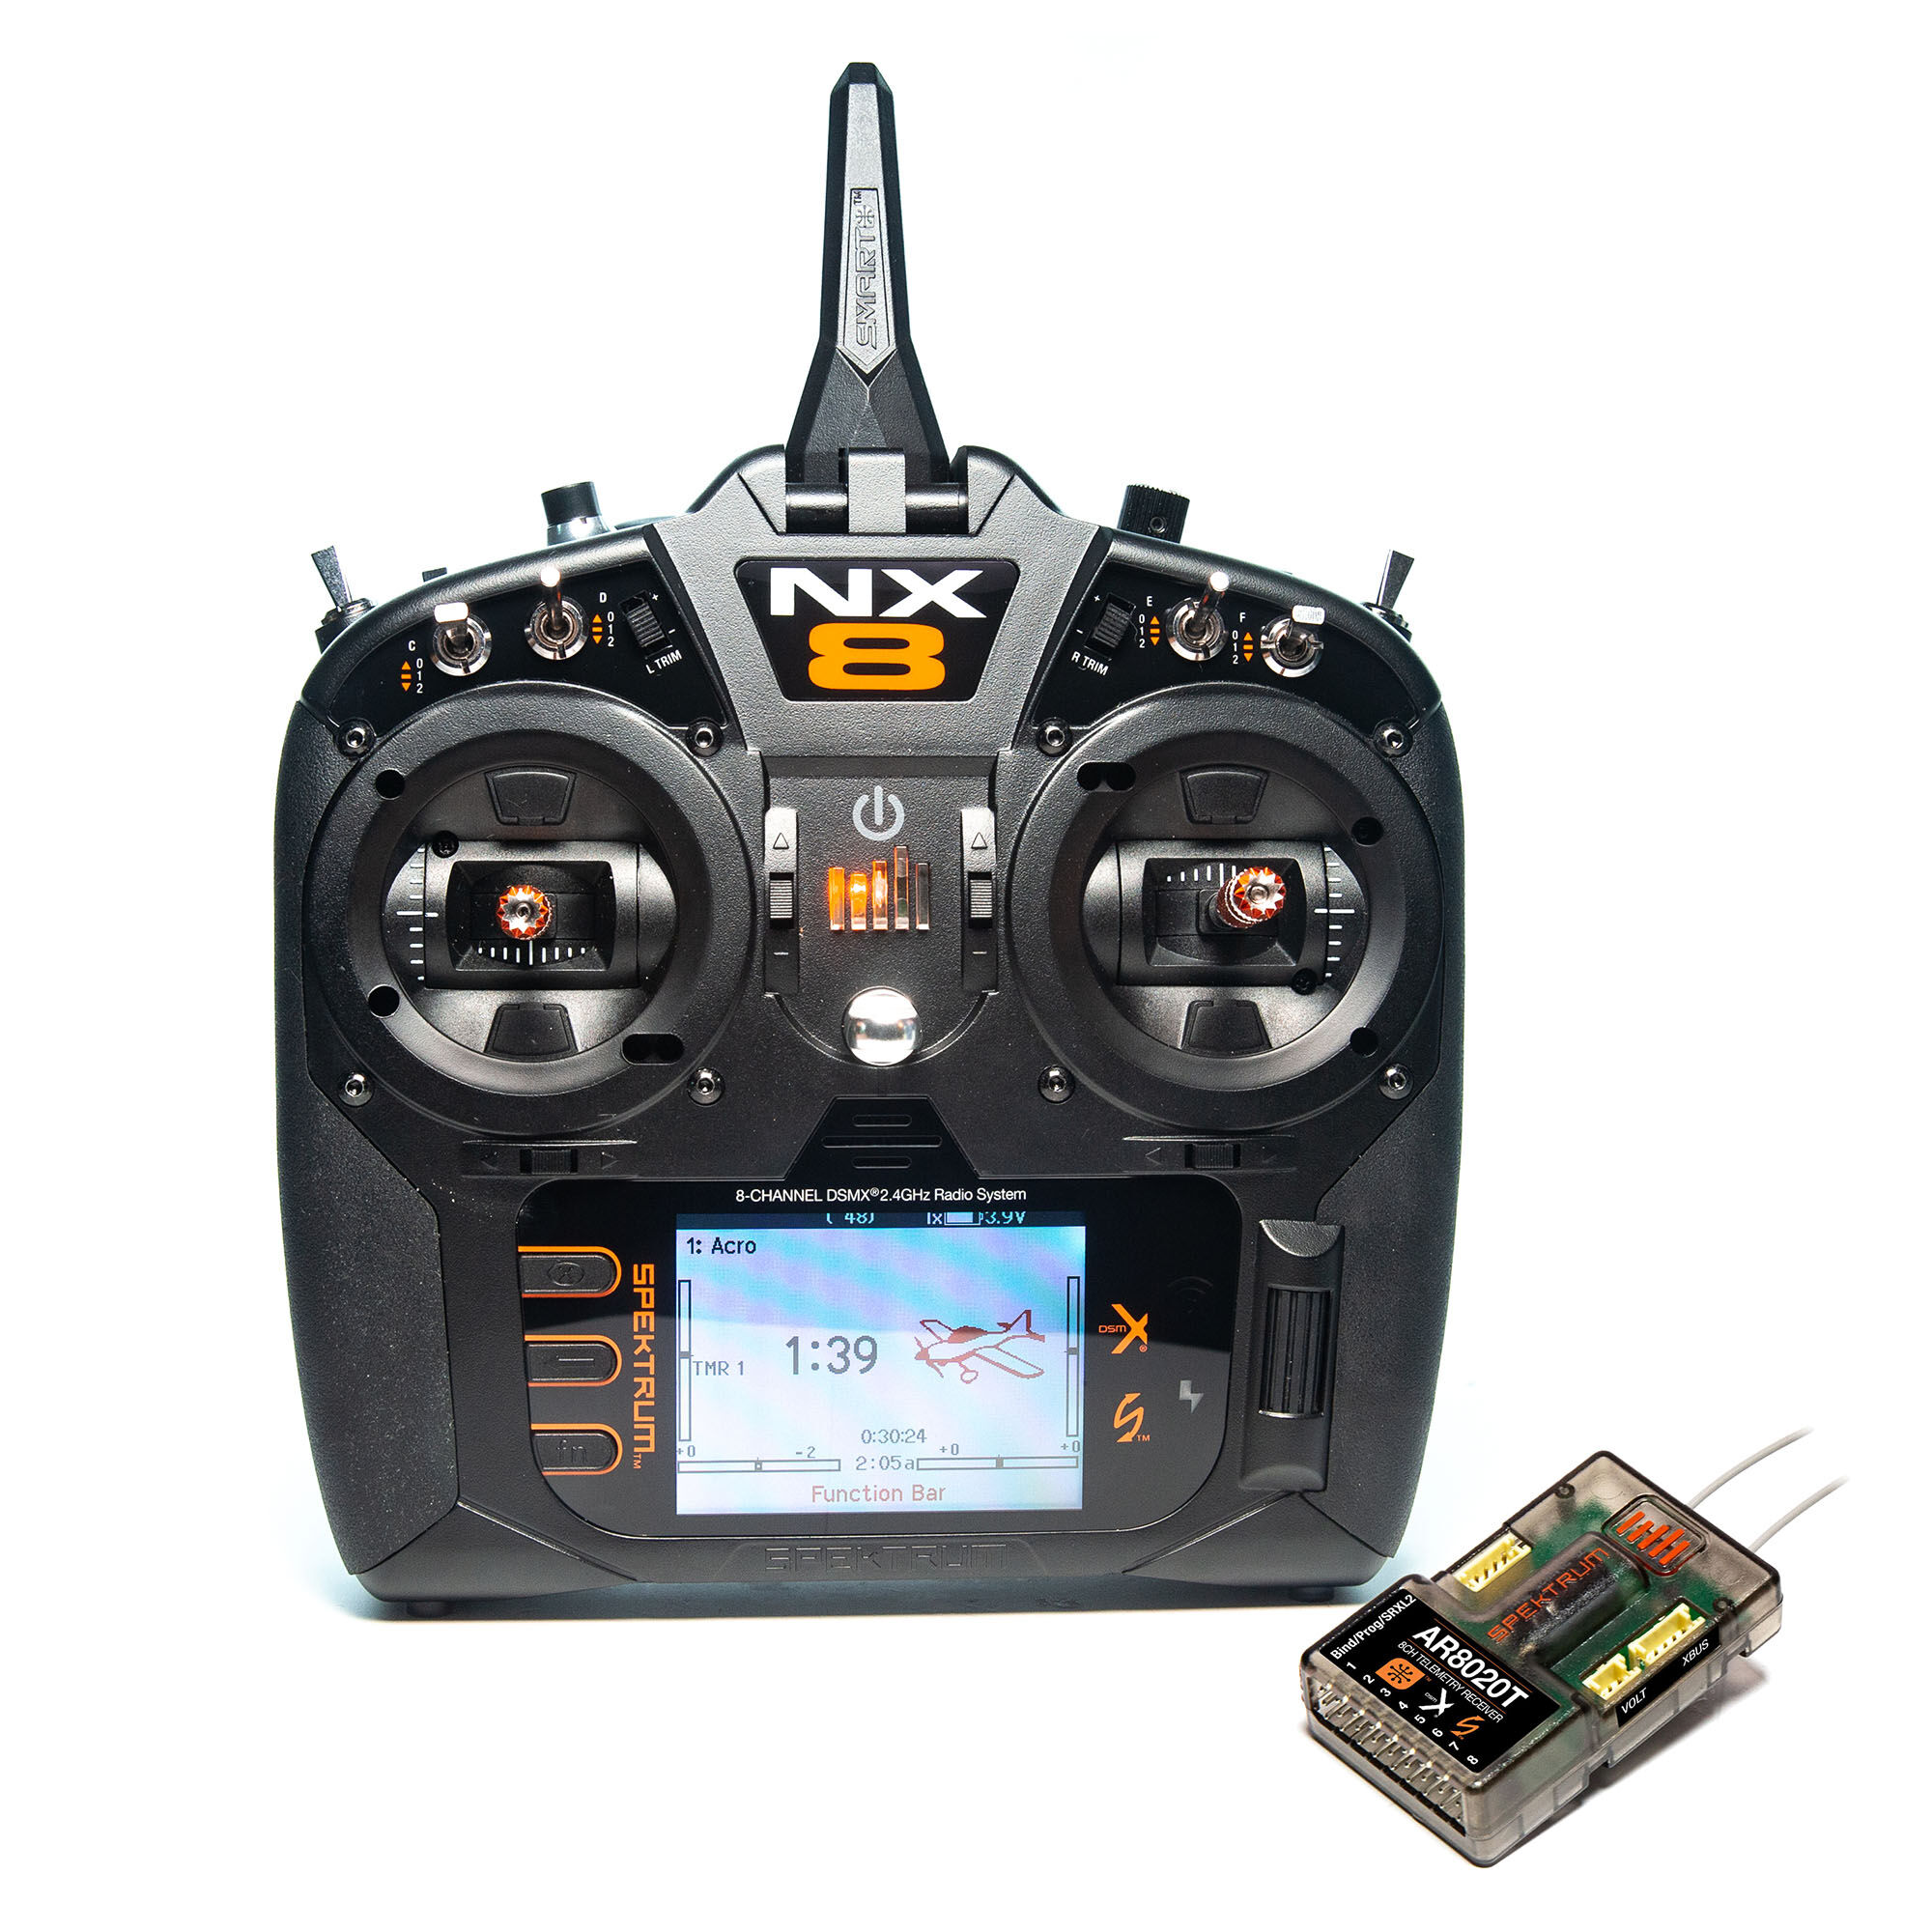 NX8 8 Channel System w/ AR8020T Telemetry Receiver